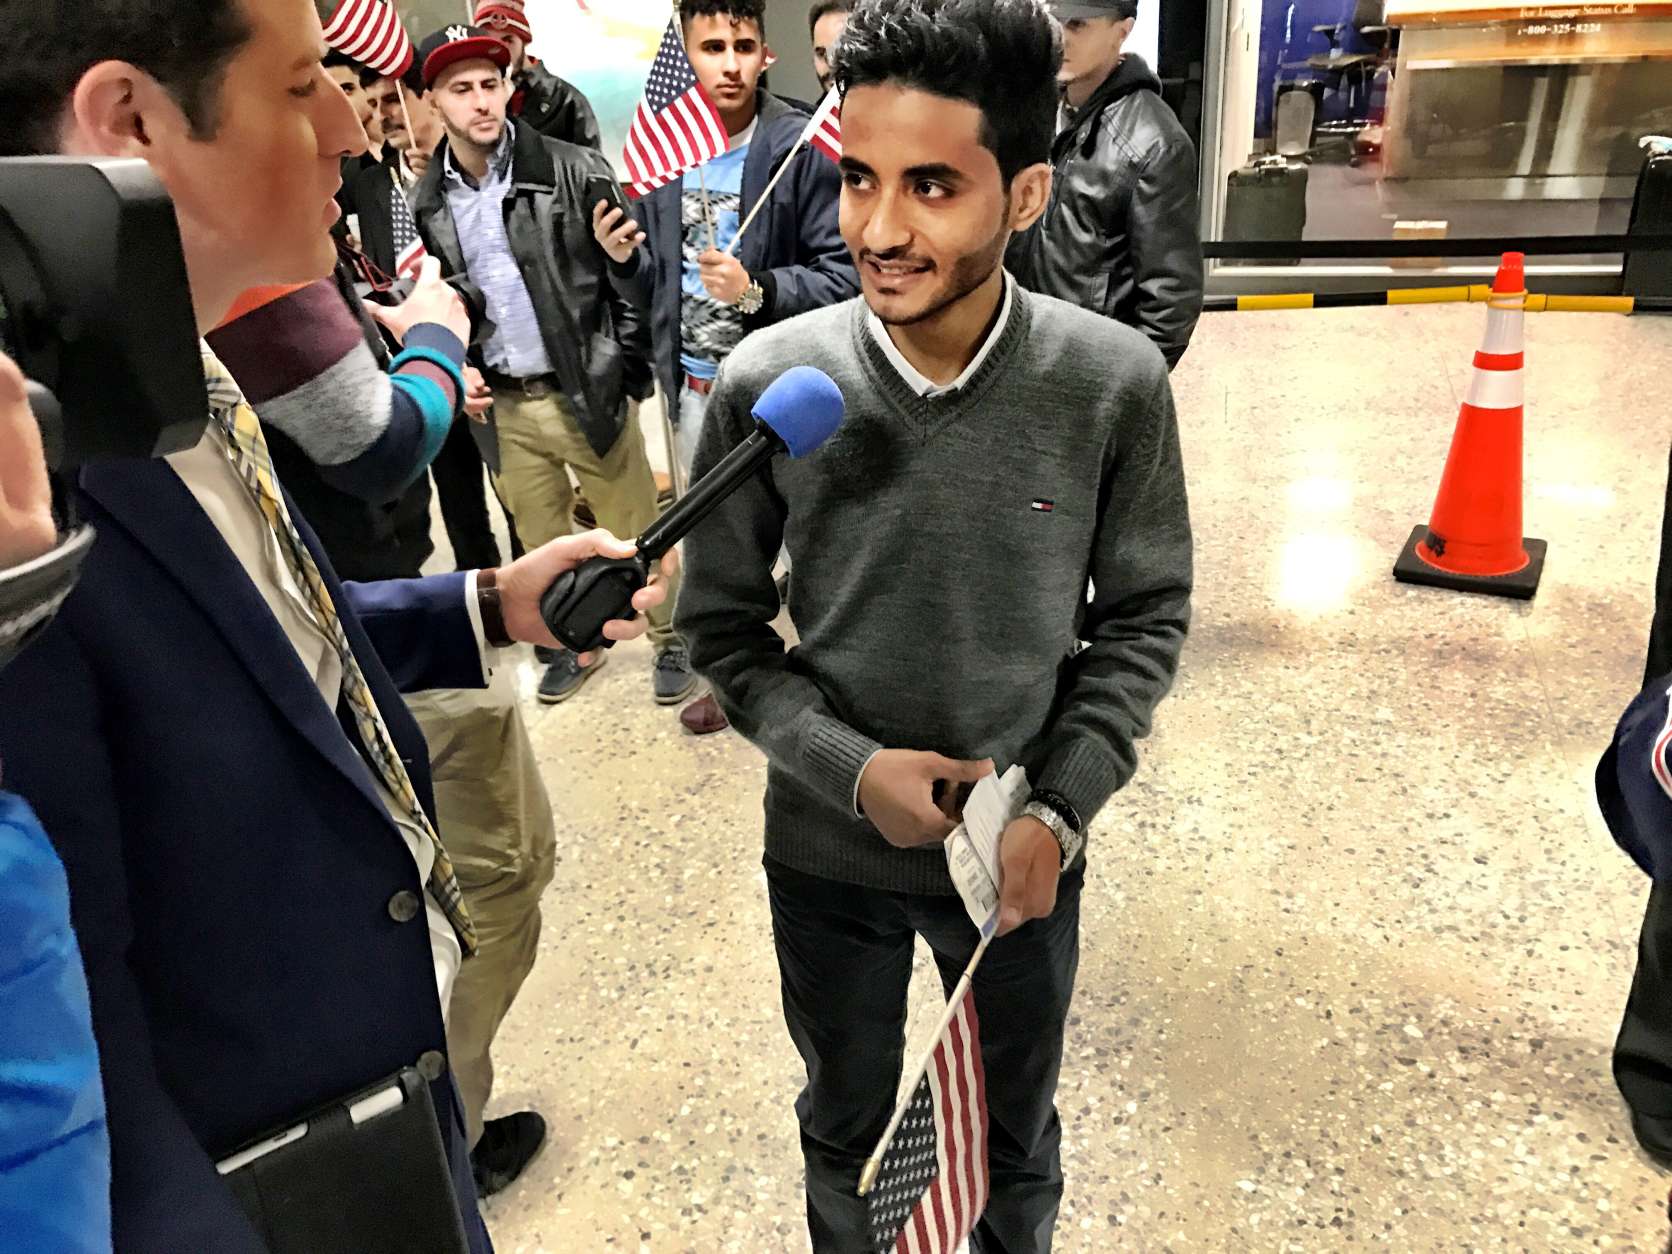 Tareq Aziz, 21, native of Yemen with a green card, arrives back in the U.S. at Dulles international Airport on Monday, along with his brother Ammar. (WTOP/Neal Augenstein)